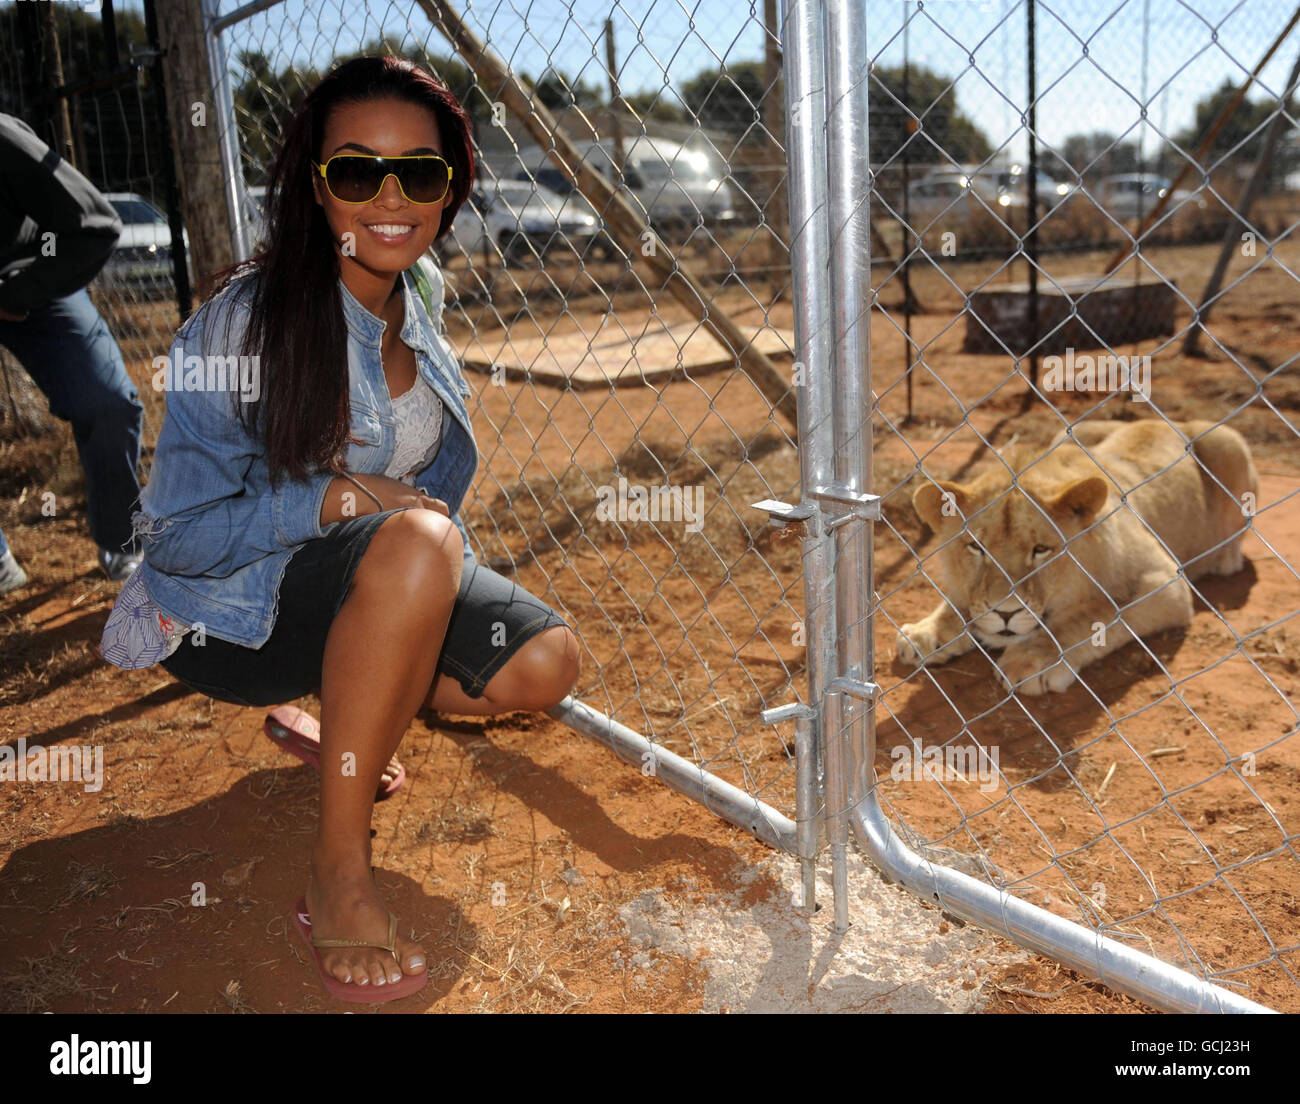 Wags in South Africa Stock Photo